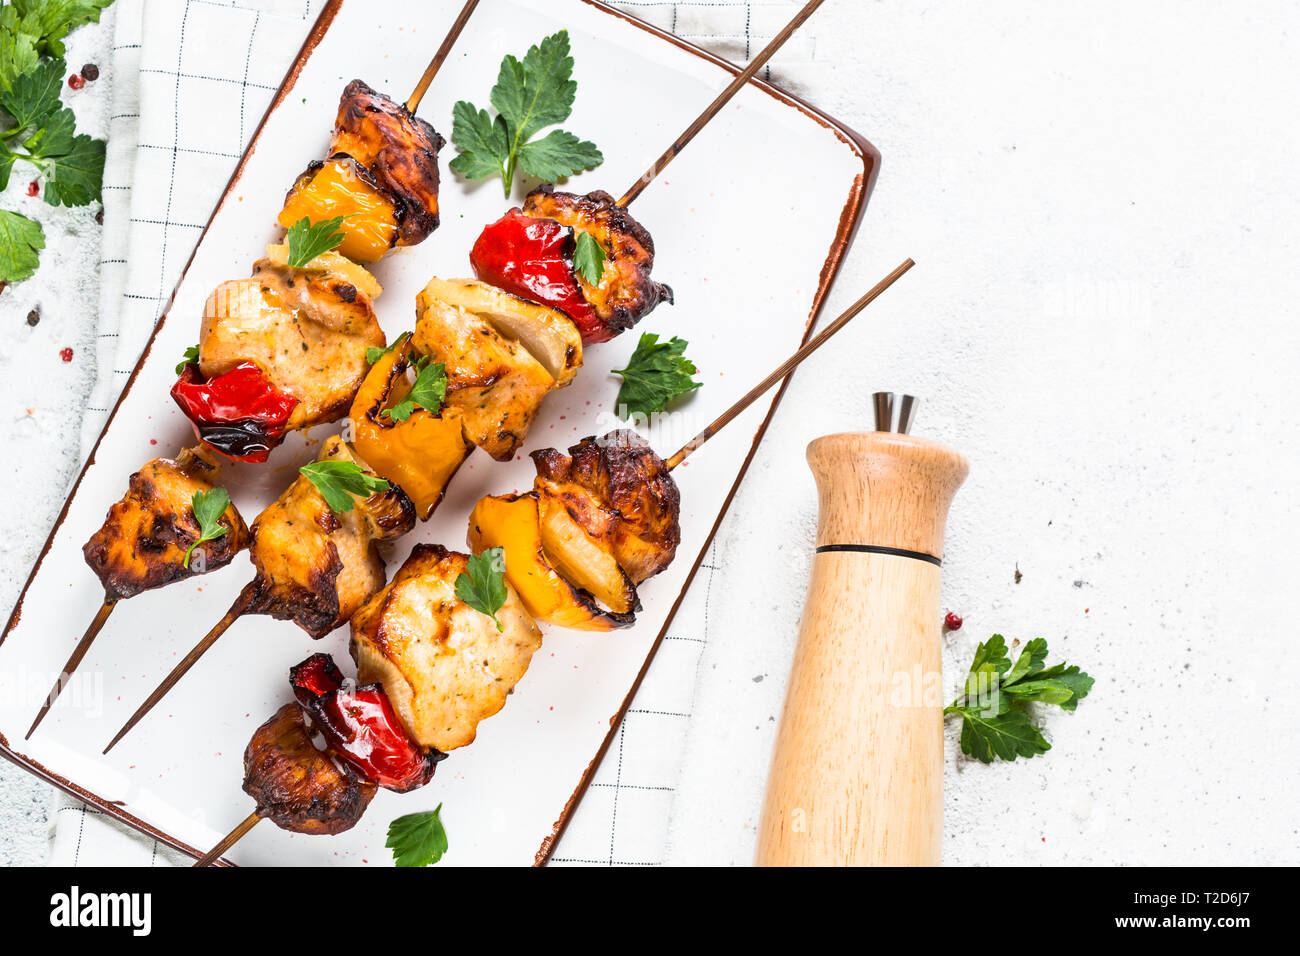 Chicken kebab or shashlik with vegetables on skewers on white stone table. Top view with copy space. Stock Photo